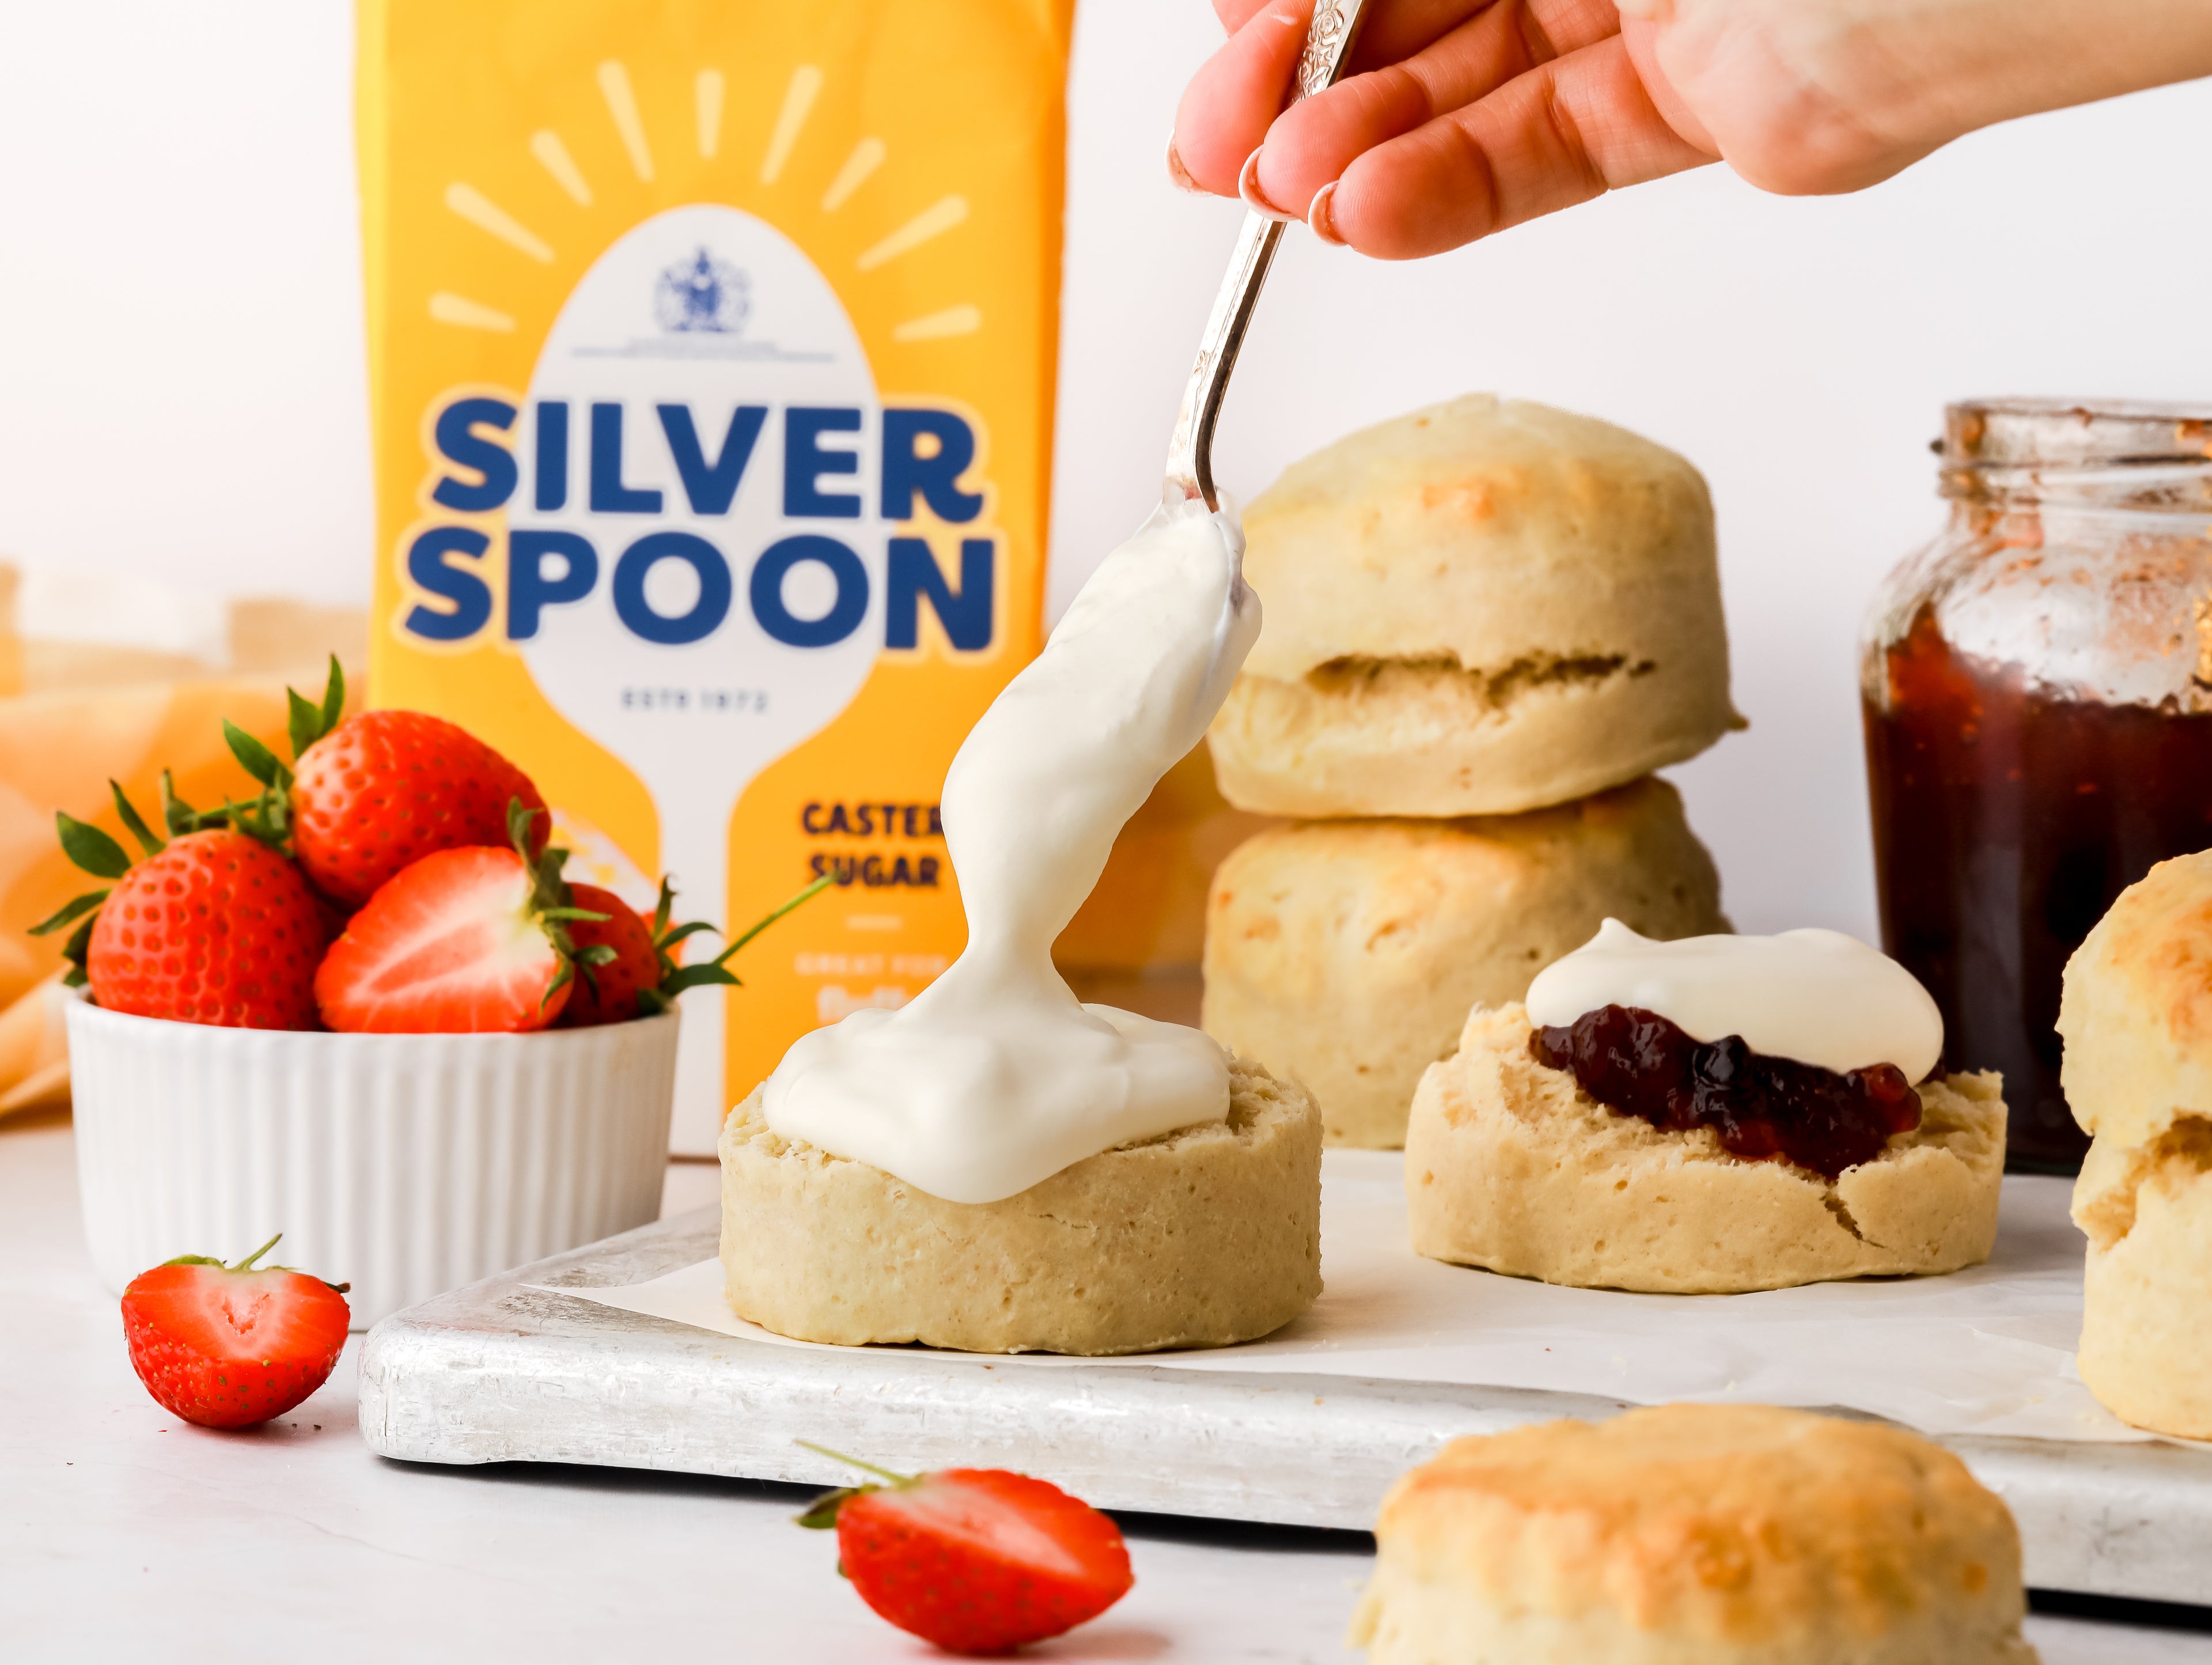 Hand spooning cream onto a scone, surrounded by strawberries and sugar pack